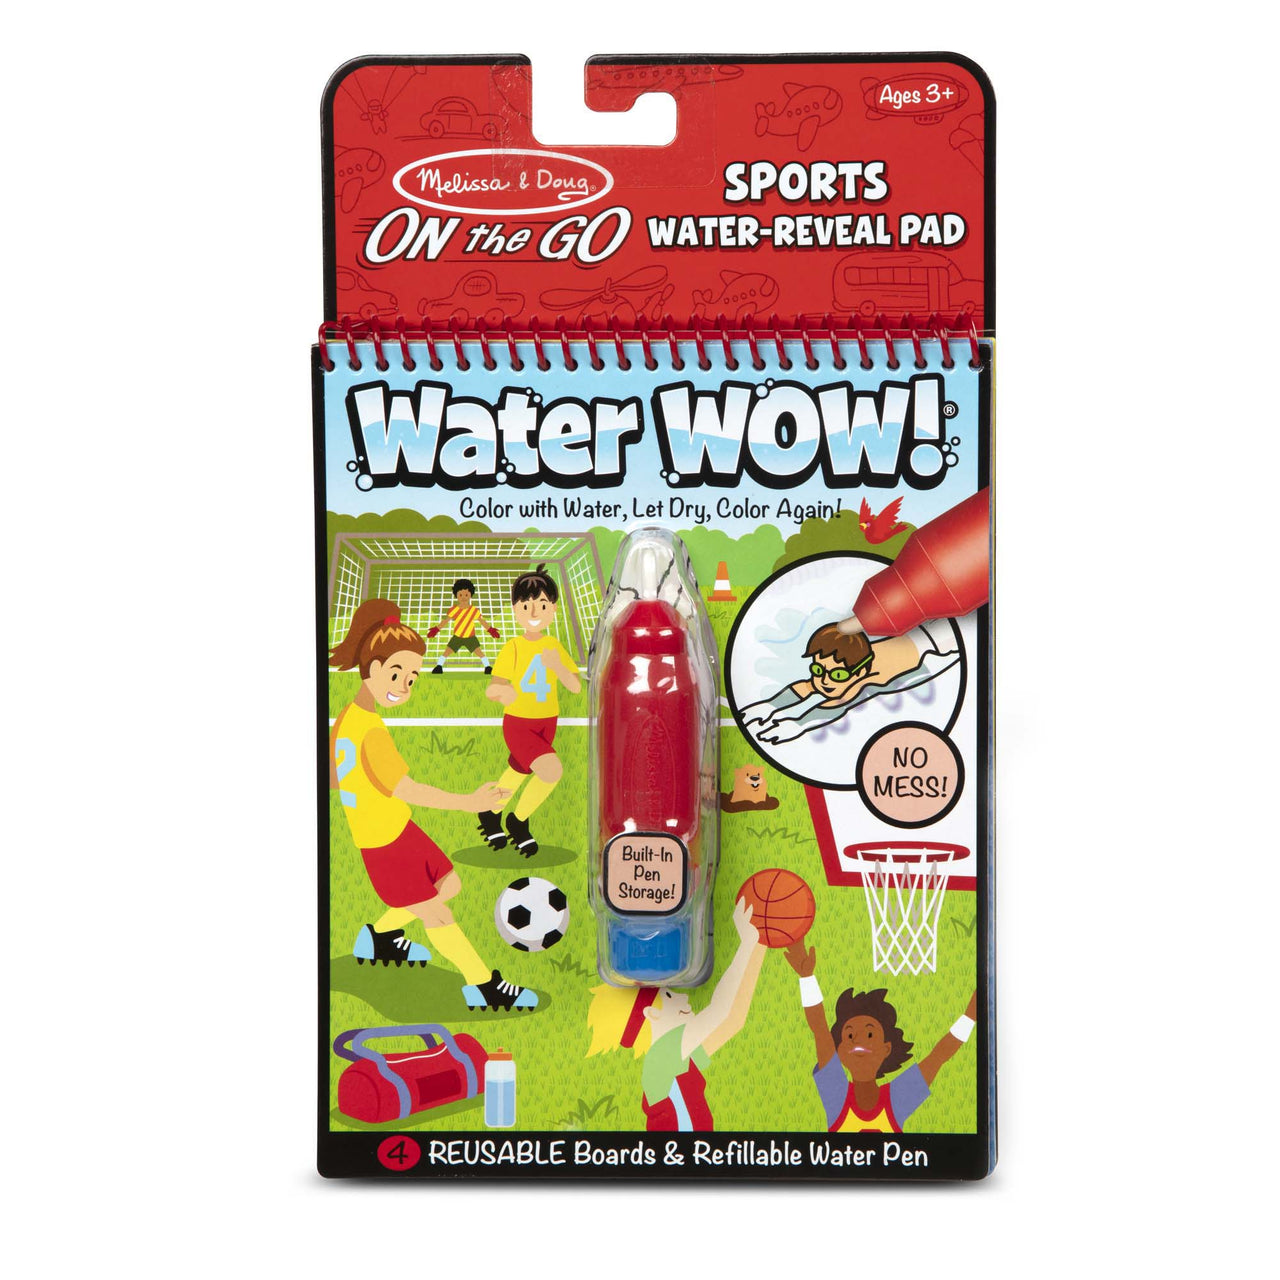 Melissa & Doug Water Wow Sports Water-Reveal Pad